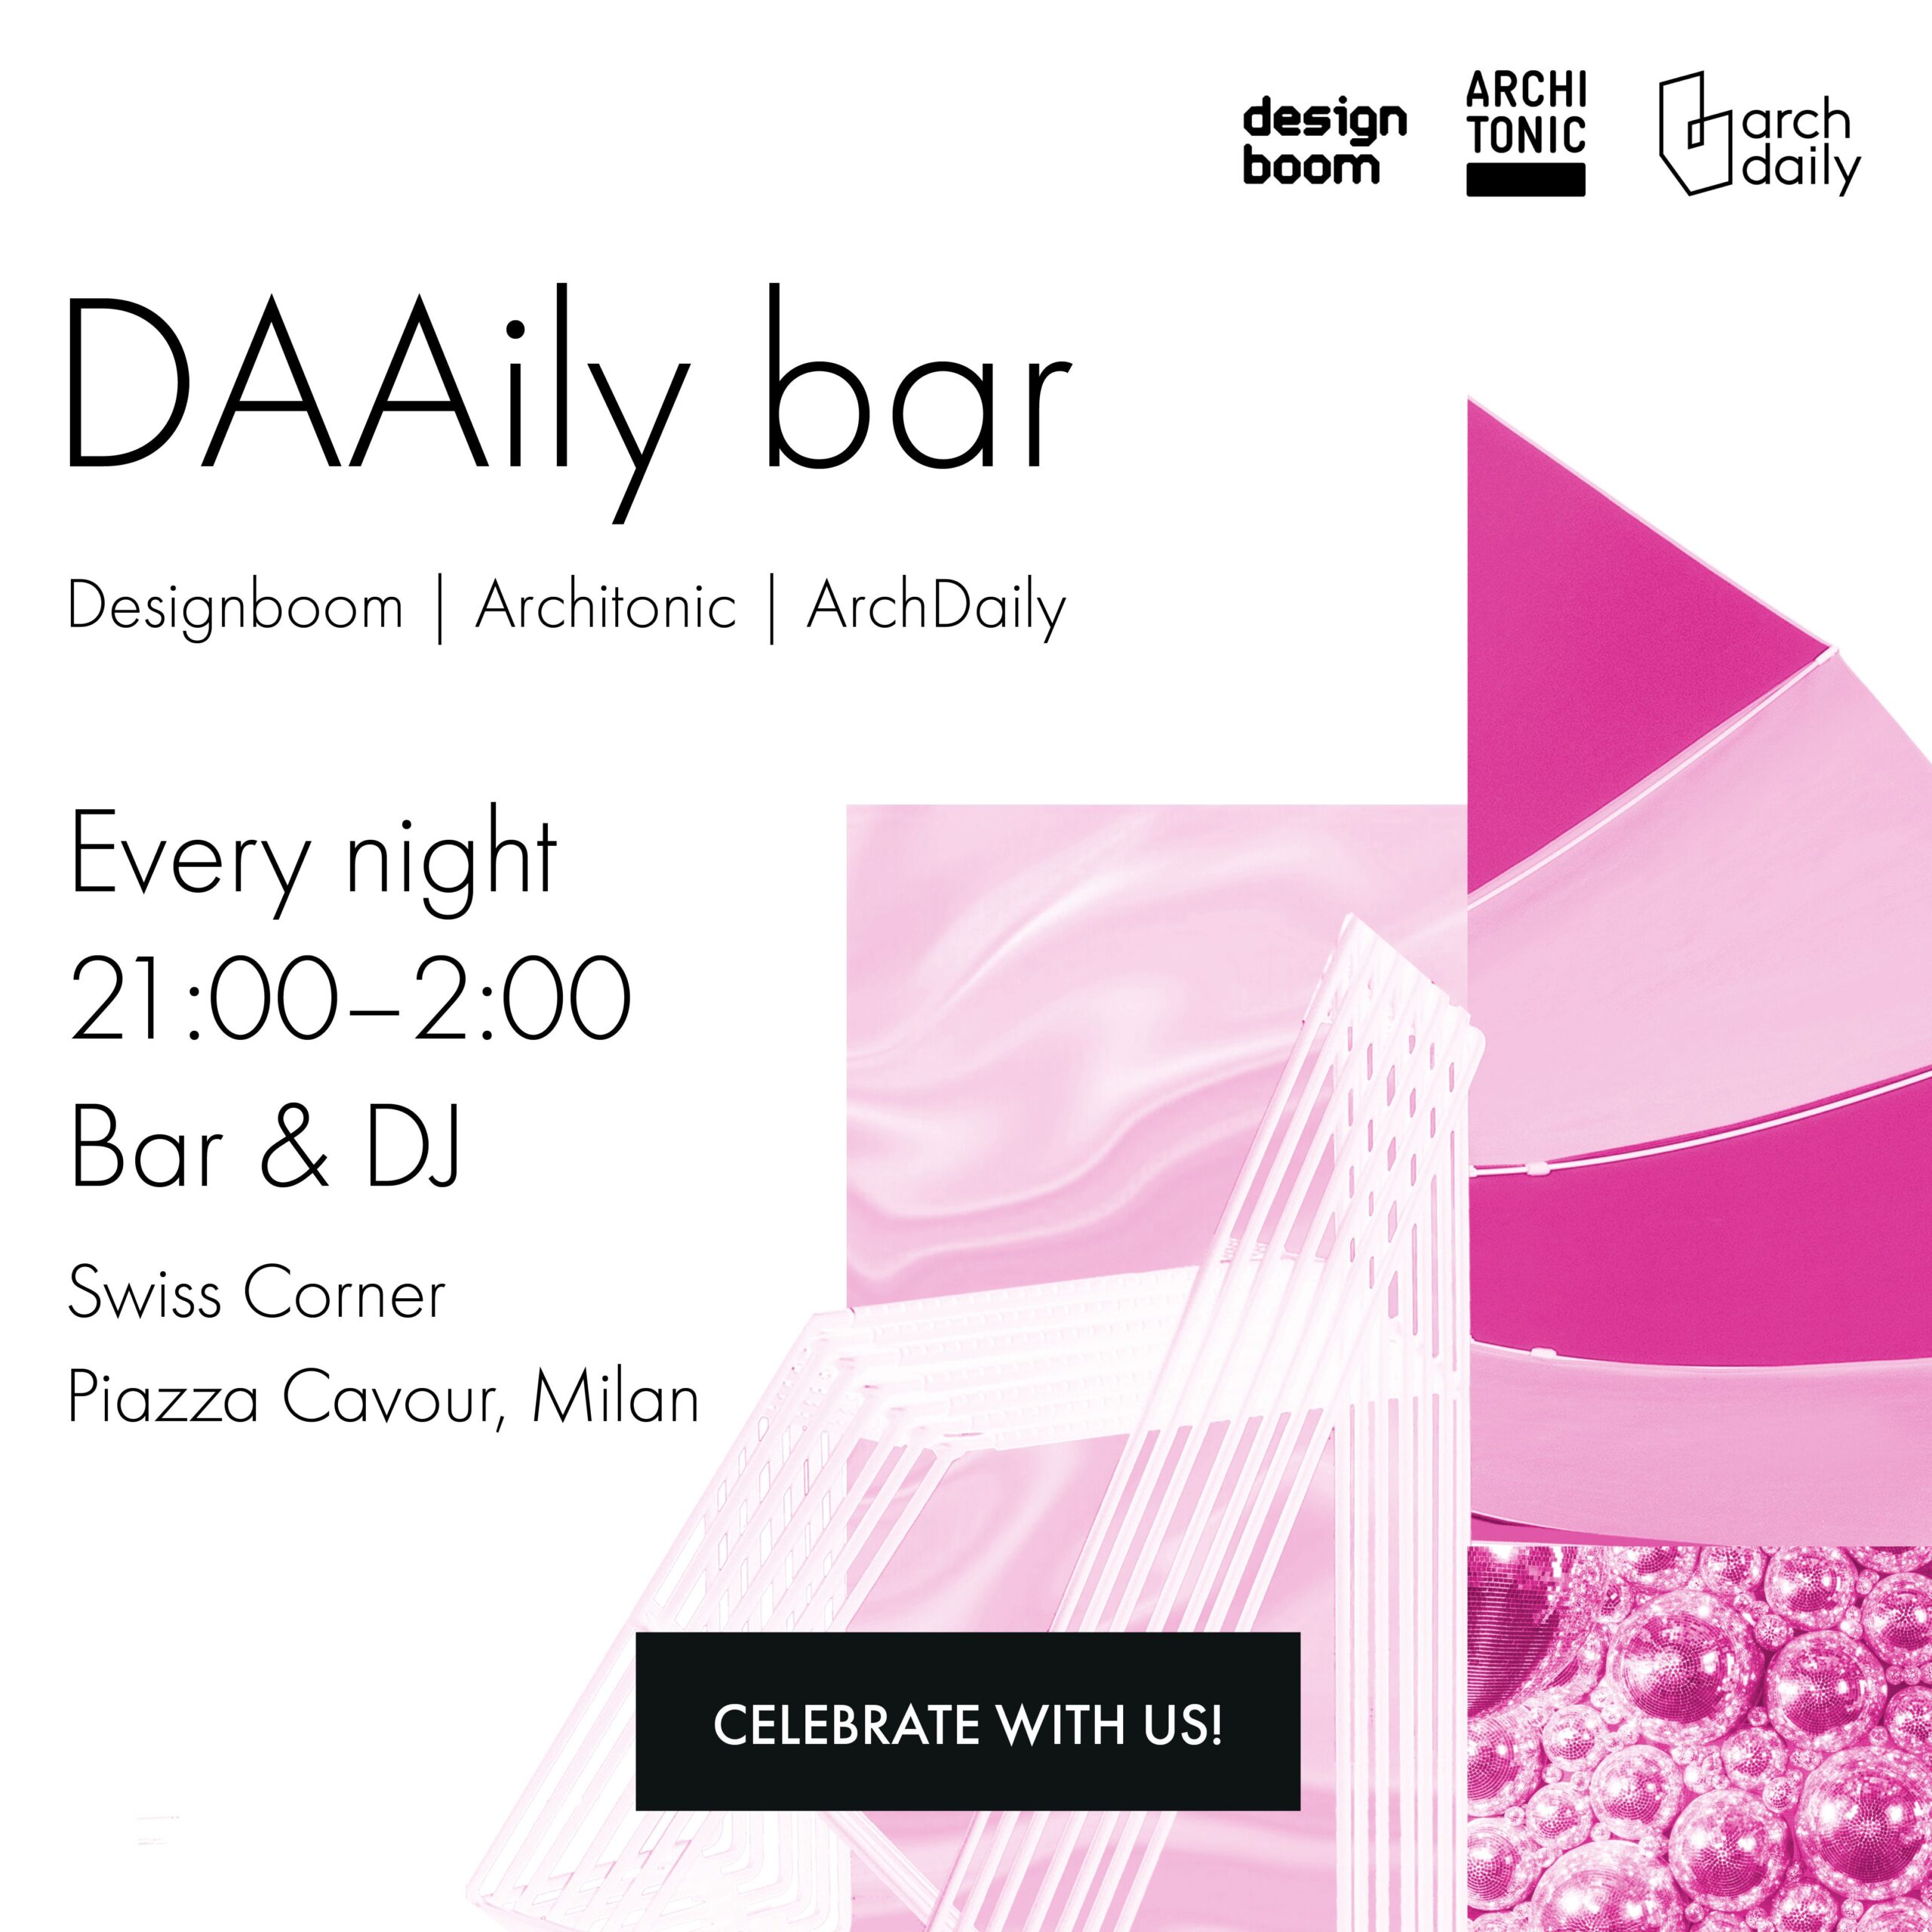 FuoriSalone: the DAAily bar is back at Swiss Corner